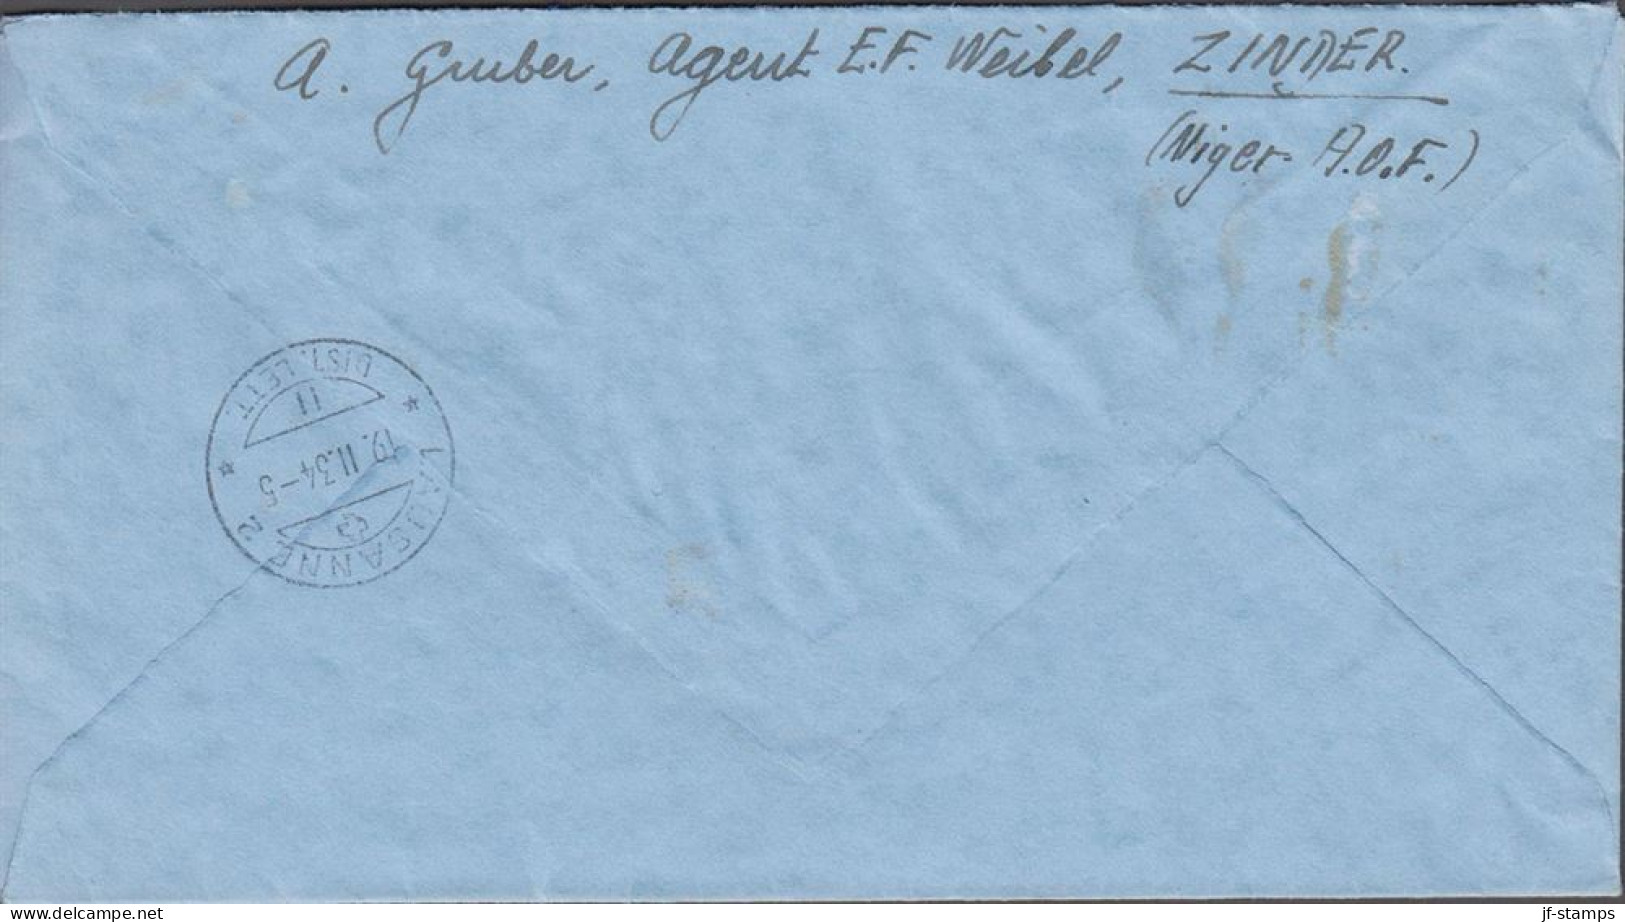 1934. NIGER. Rare Registered Cover To Lausanne, Suisse With Margin 4block (number B 23012 15)... (MICHEL 17+) - JF545402 - Gebraucht